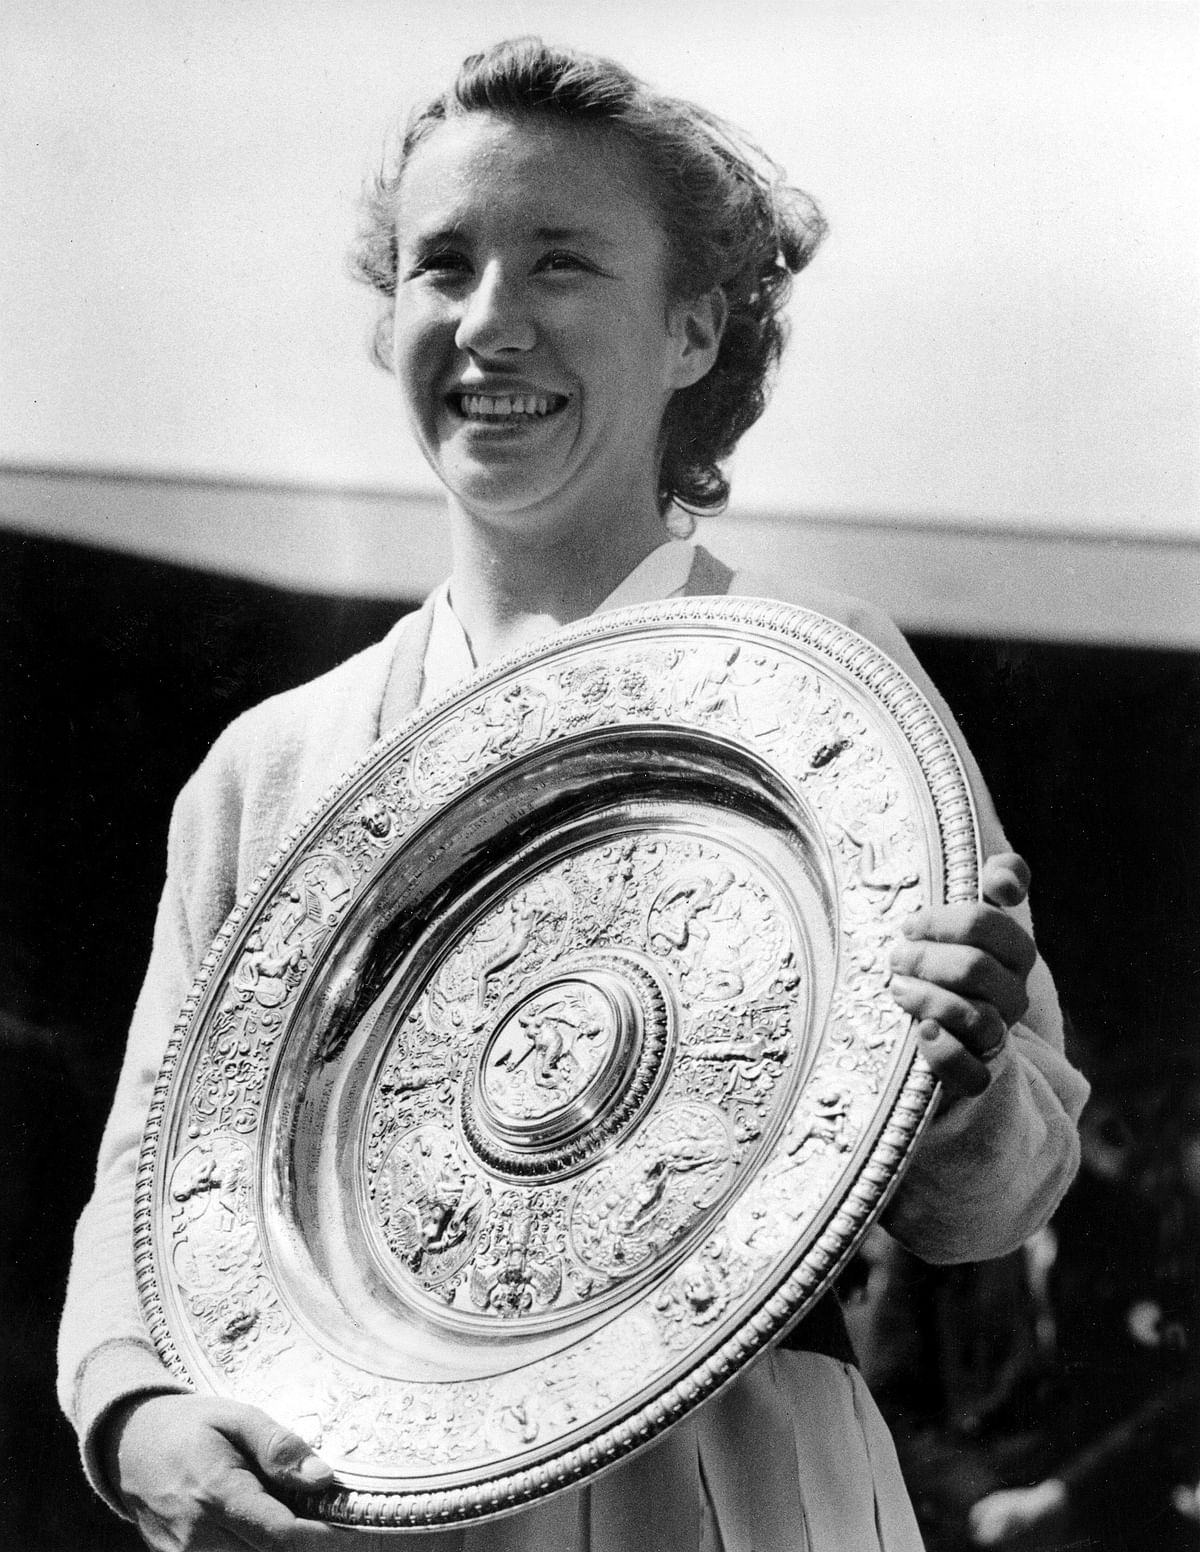 From 31-time Grand Slam Champion Helen Wills Moody, to Steffi Graf to Serena Williams - pictures of Wimbledon’s best.